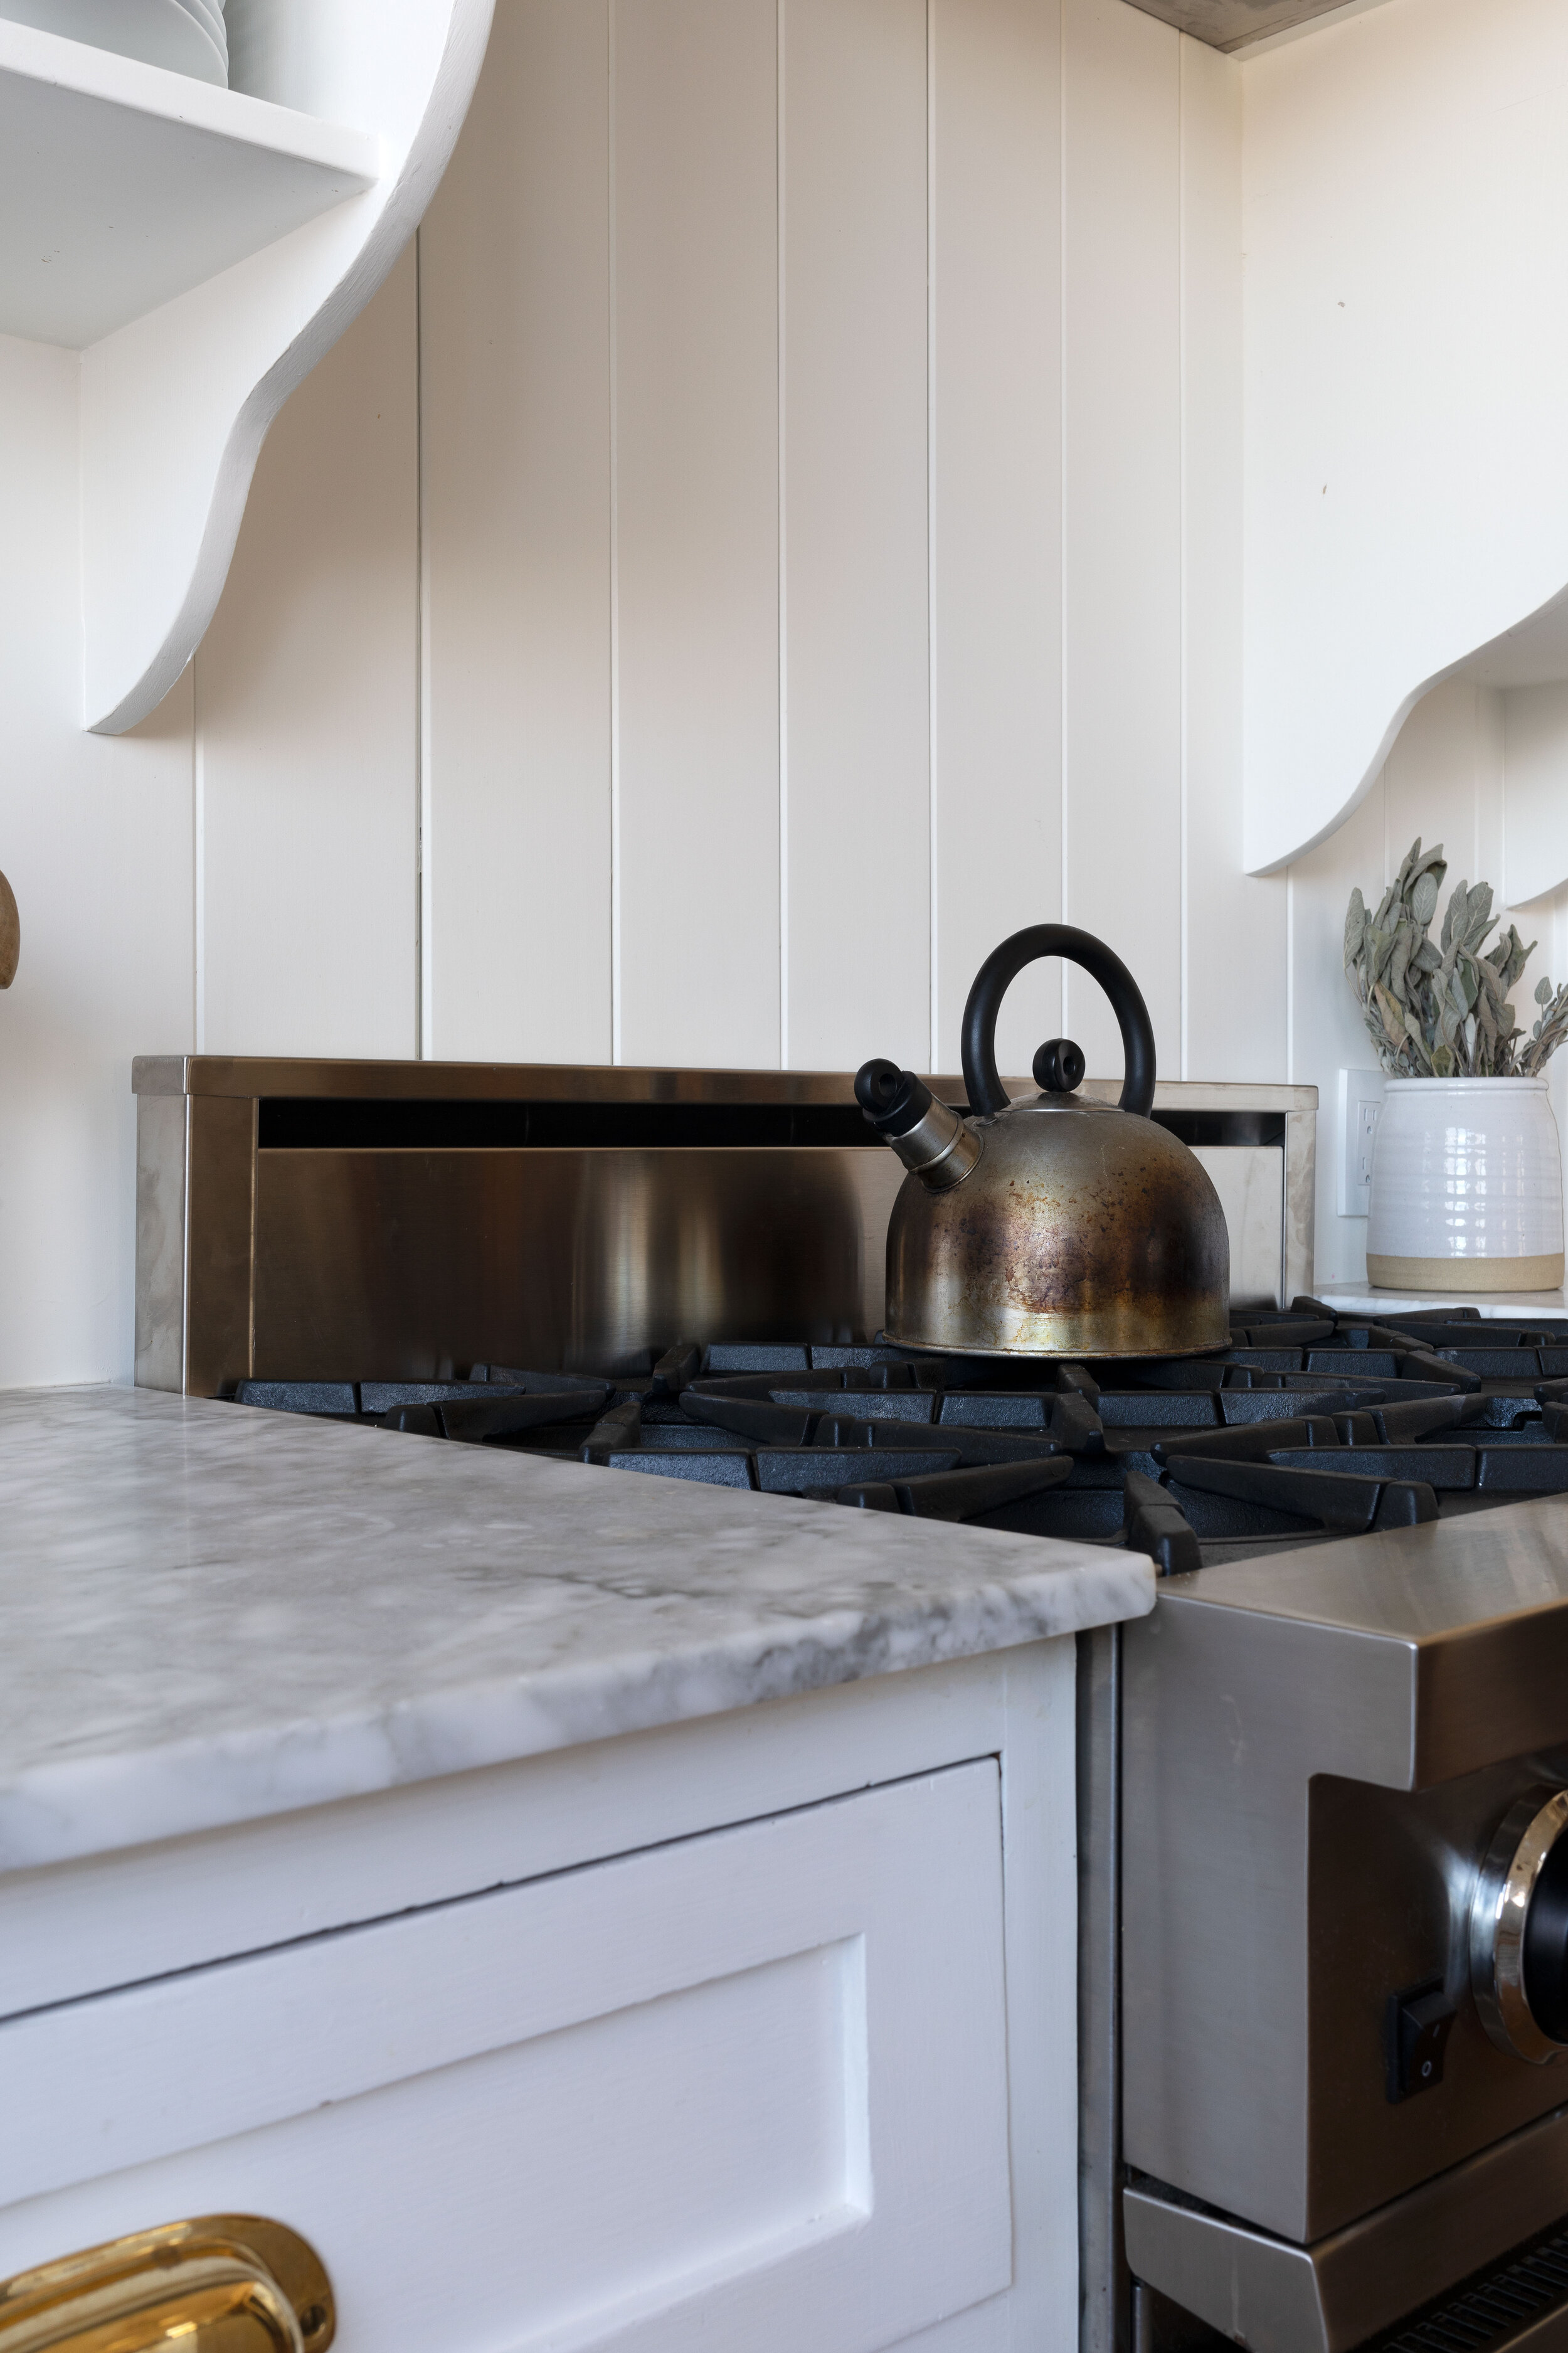 Why We Added a Backsplash To our Range (+ How the Paneling is Holding Up) —  The Grit and Polish